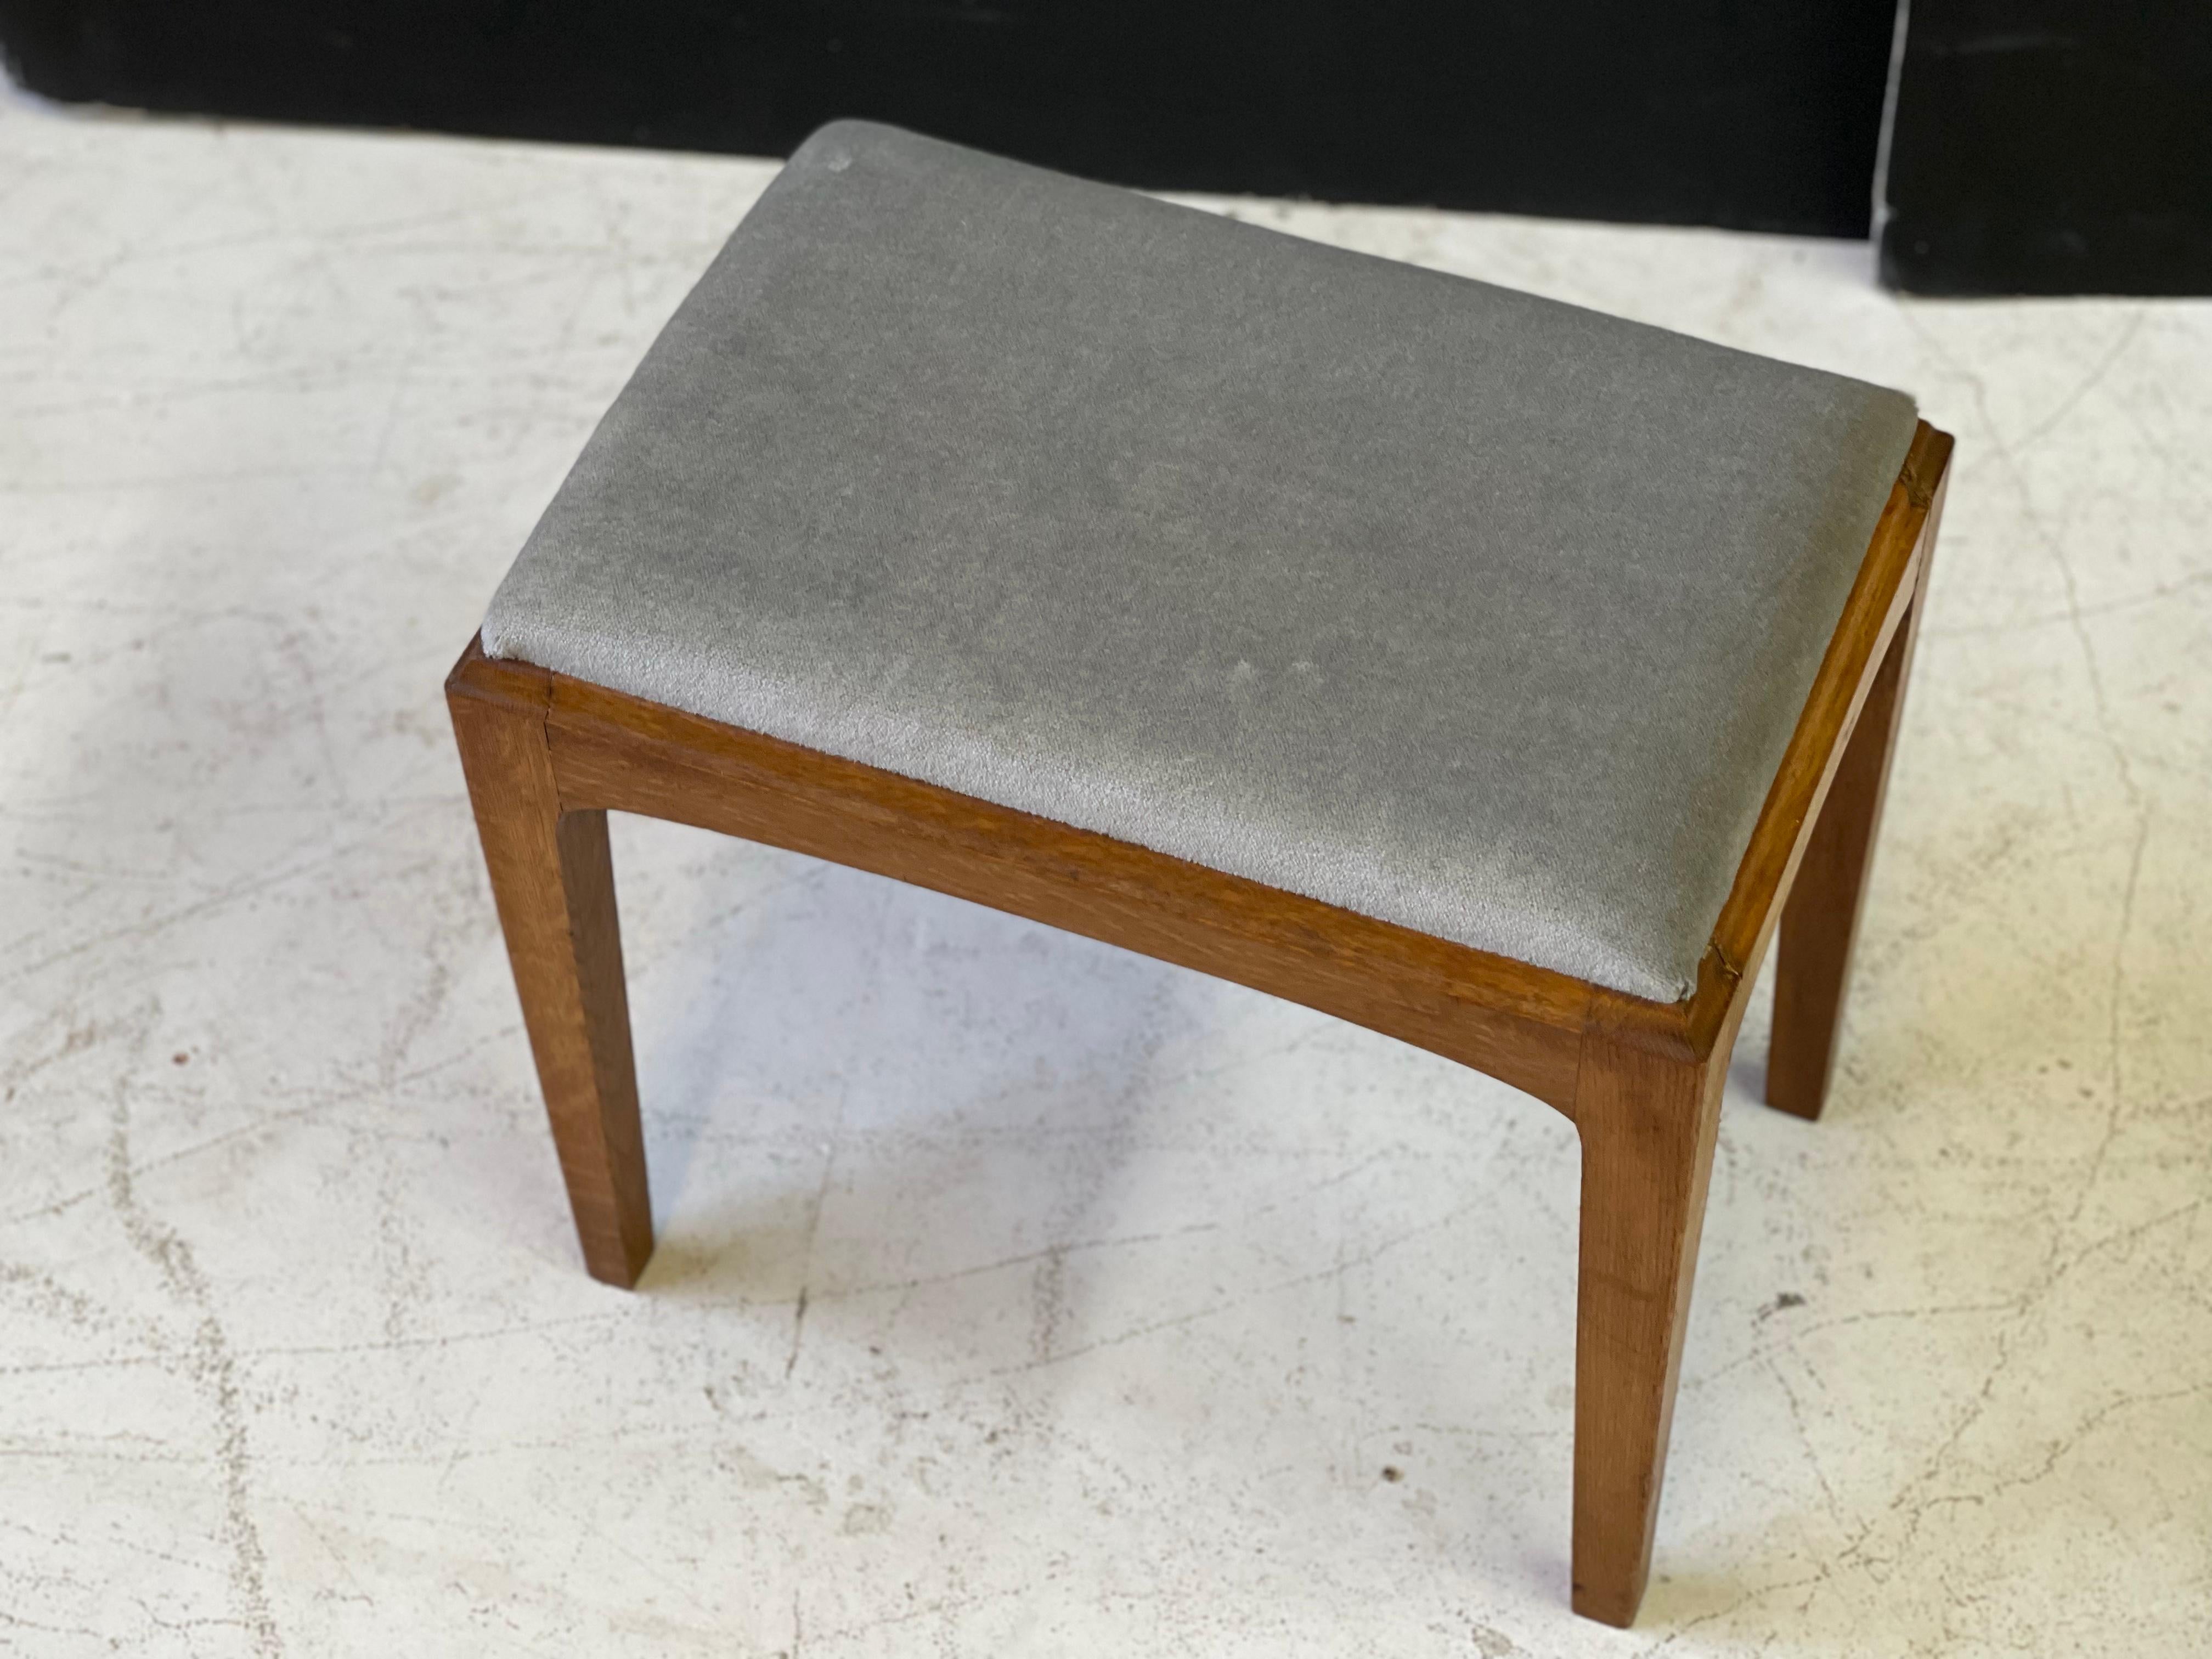 Mid-20th Century English Midcentury Stool by John and Silvia Reid for Stag Furniture For Sale